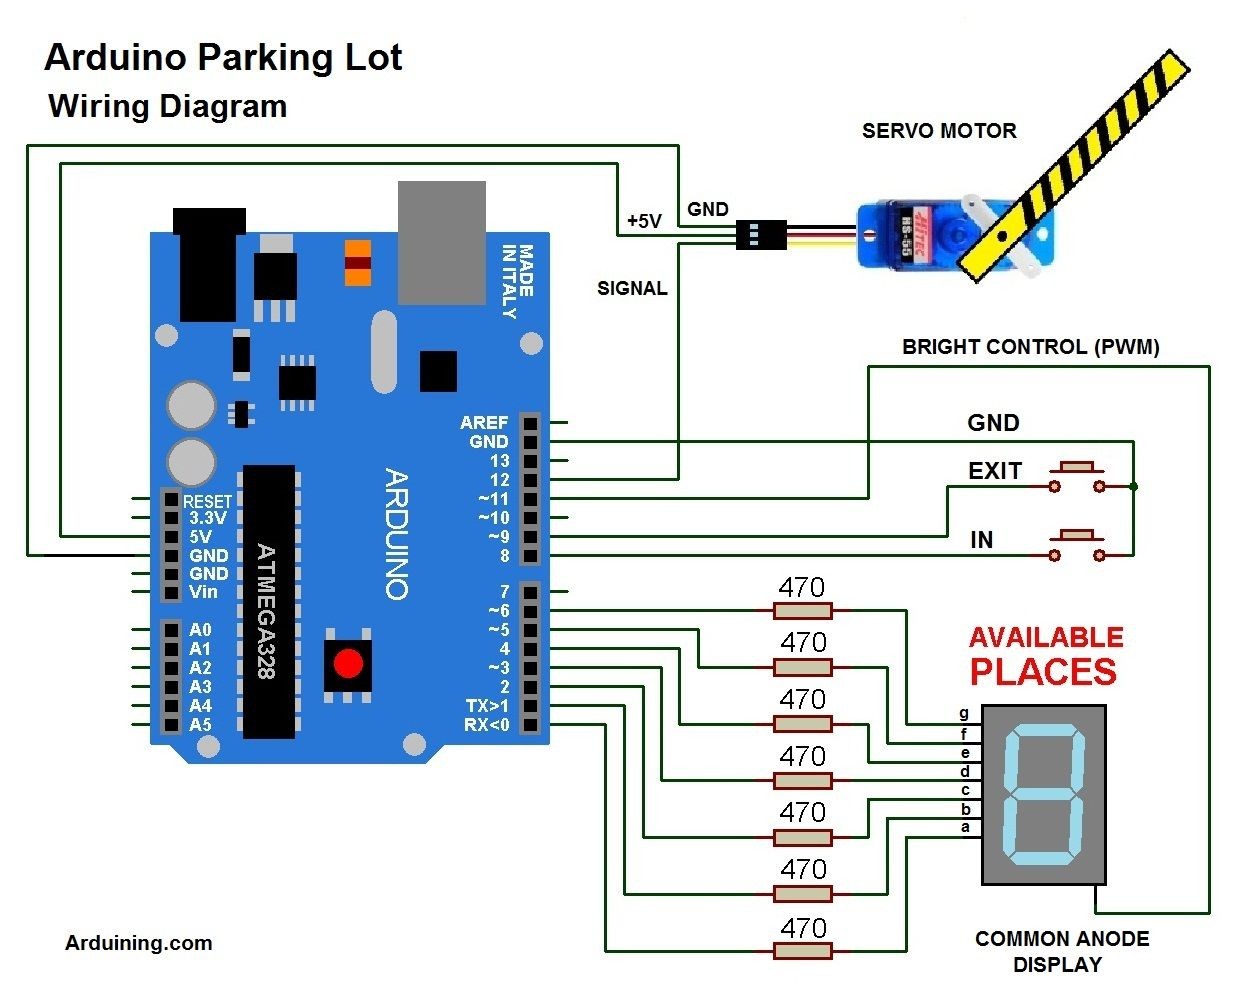 wiring diagram here is the code parkingl02 pde arduining 08 arduino wiring diagram software